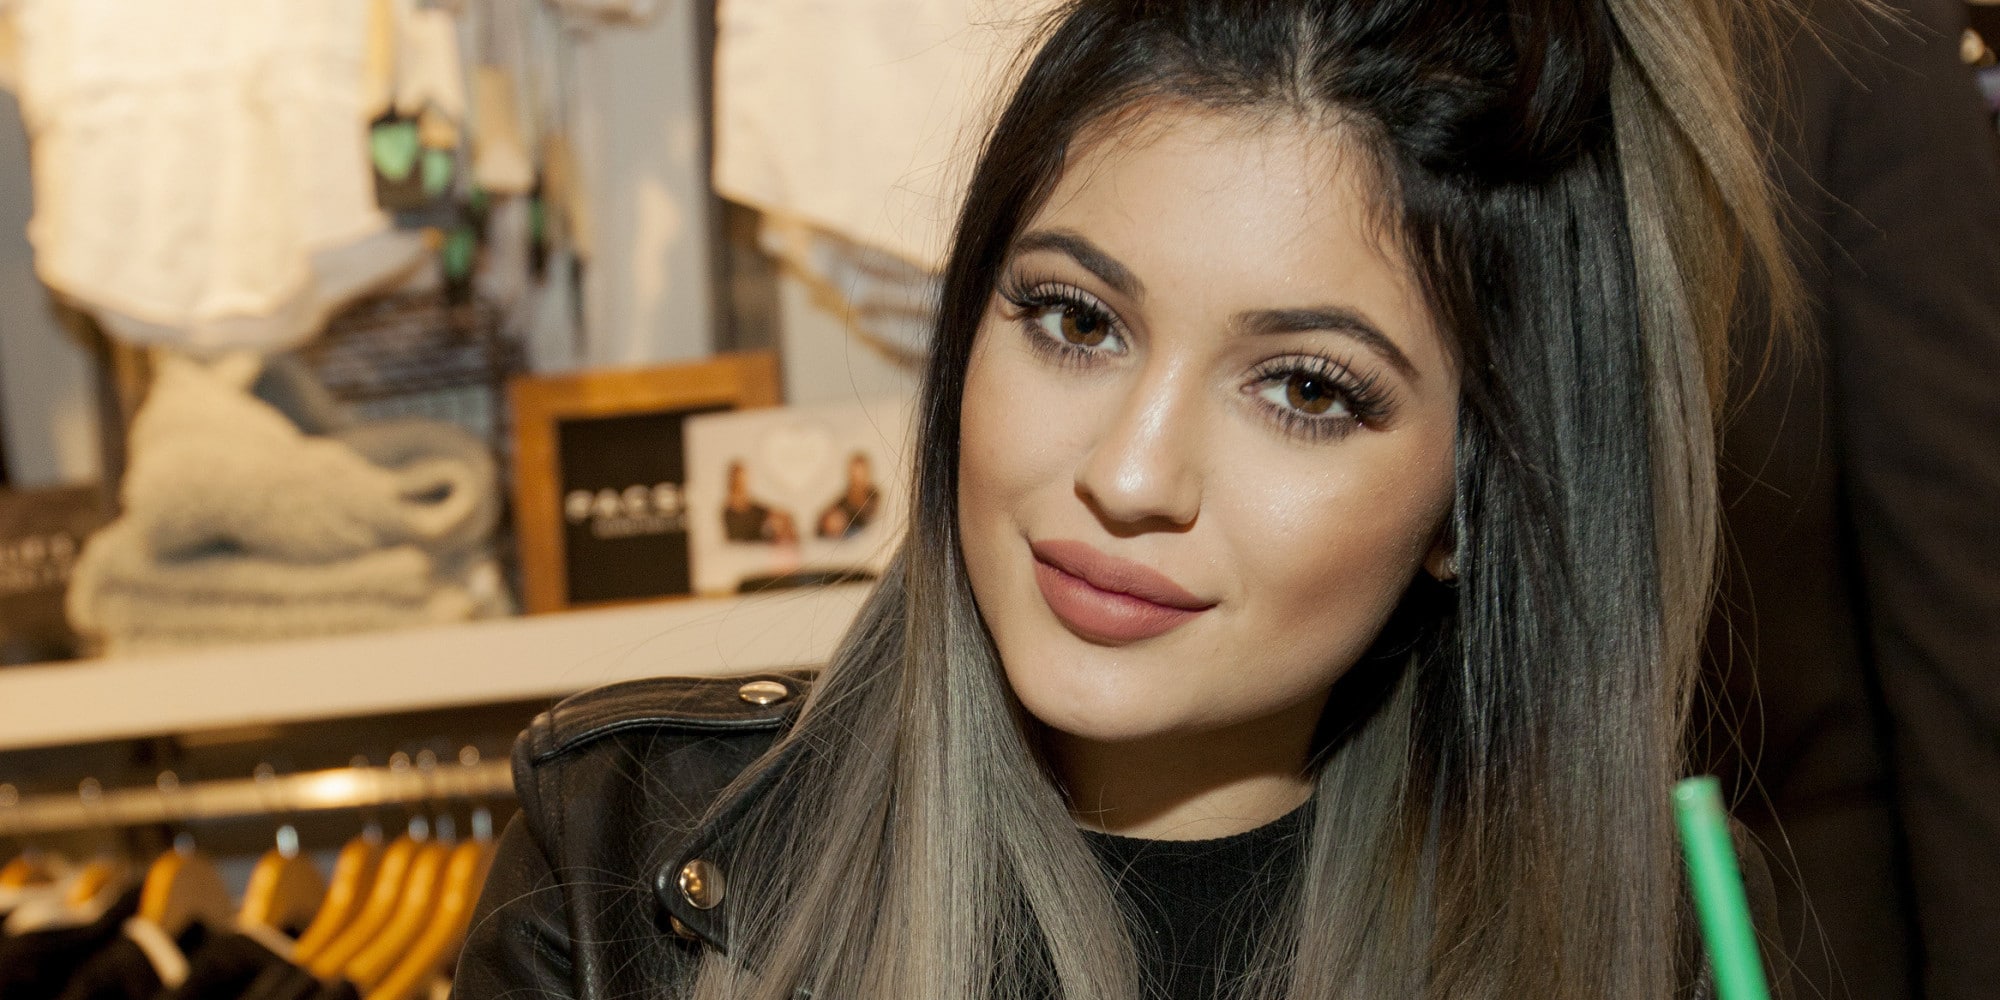 Kylie Jenner at the launch of the Kendall and Kylie Holiday Collection at PacSun in Woodfield Mall on Saturday, Nov. 8, 2014, in Schaumburg, Ill. (Photo by Barry Brecheisen/Invision for Invision for PacSun/AP Images)